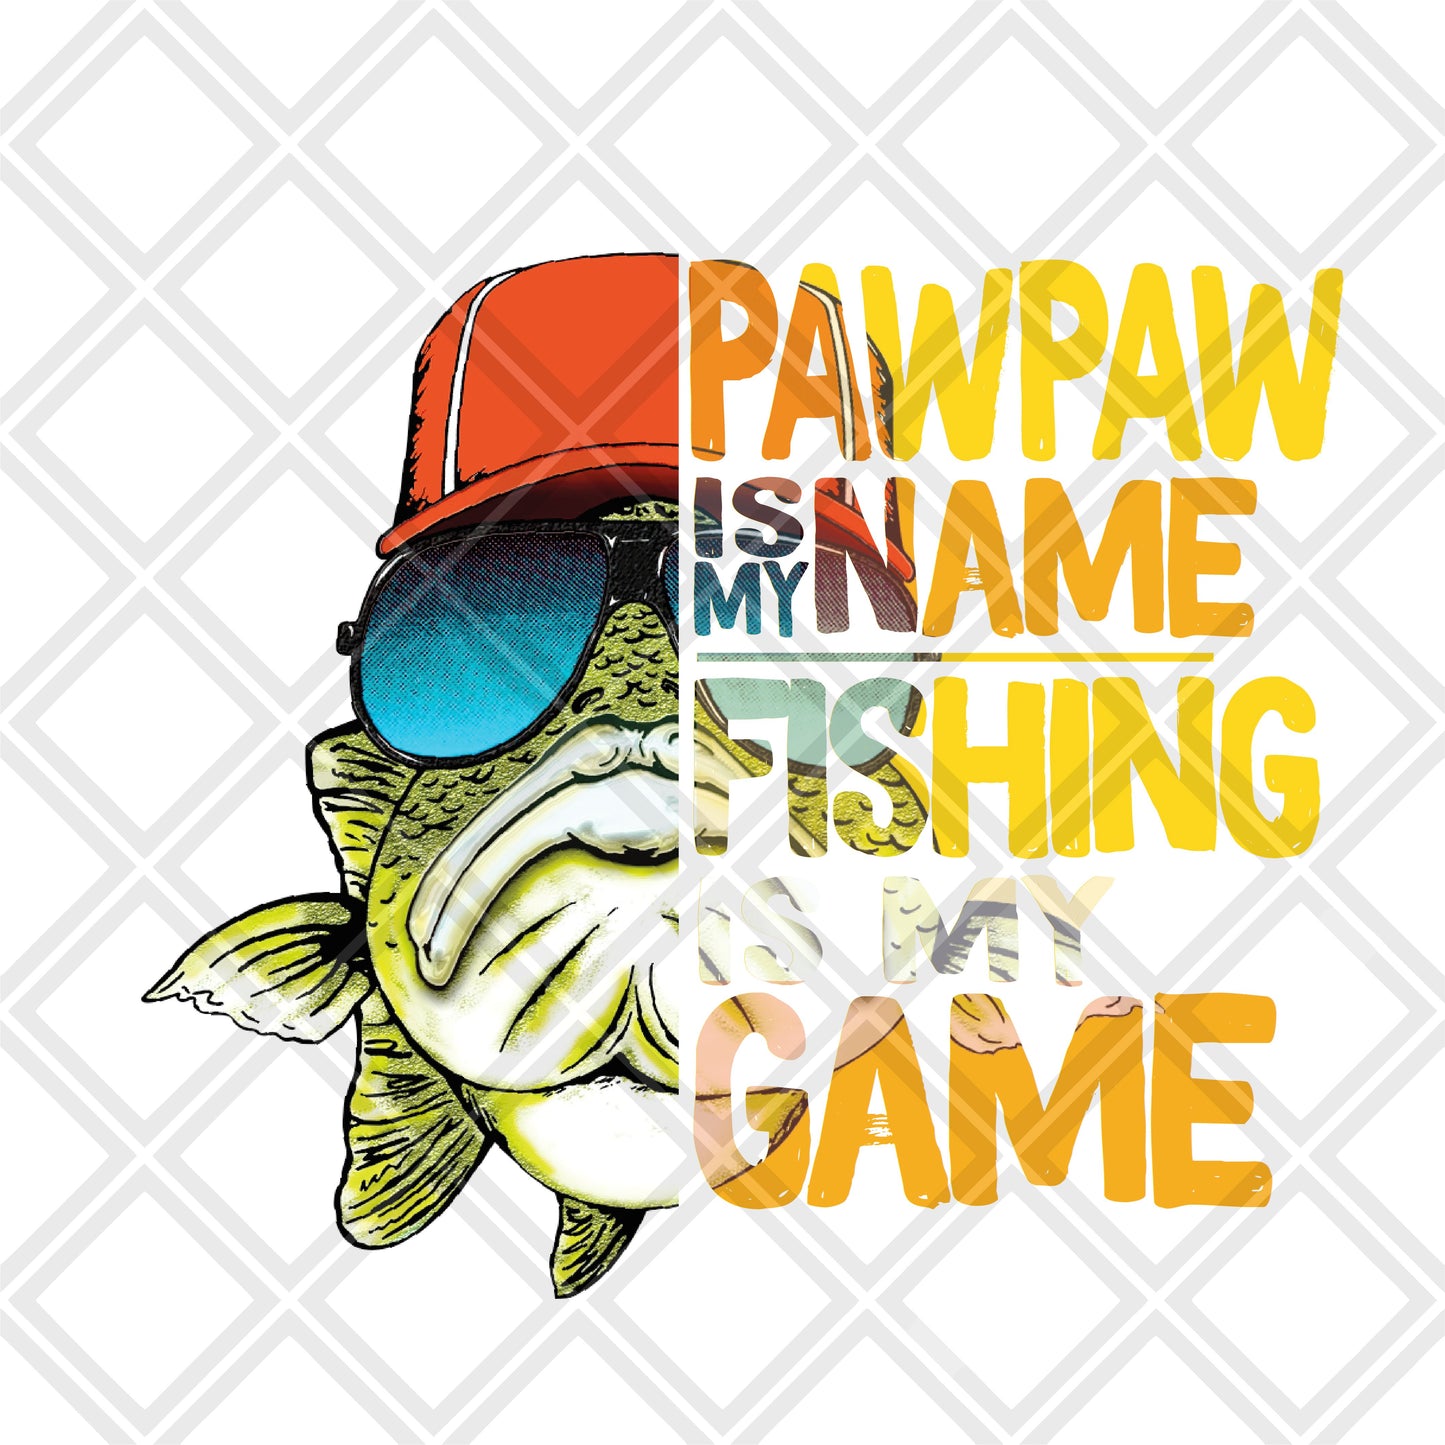 Pawpaw IS MY NAME fishing is my game DTF TRANSFERPRINT TO ORDER